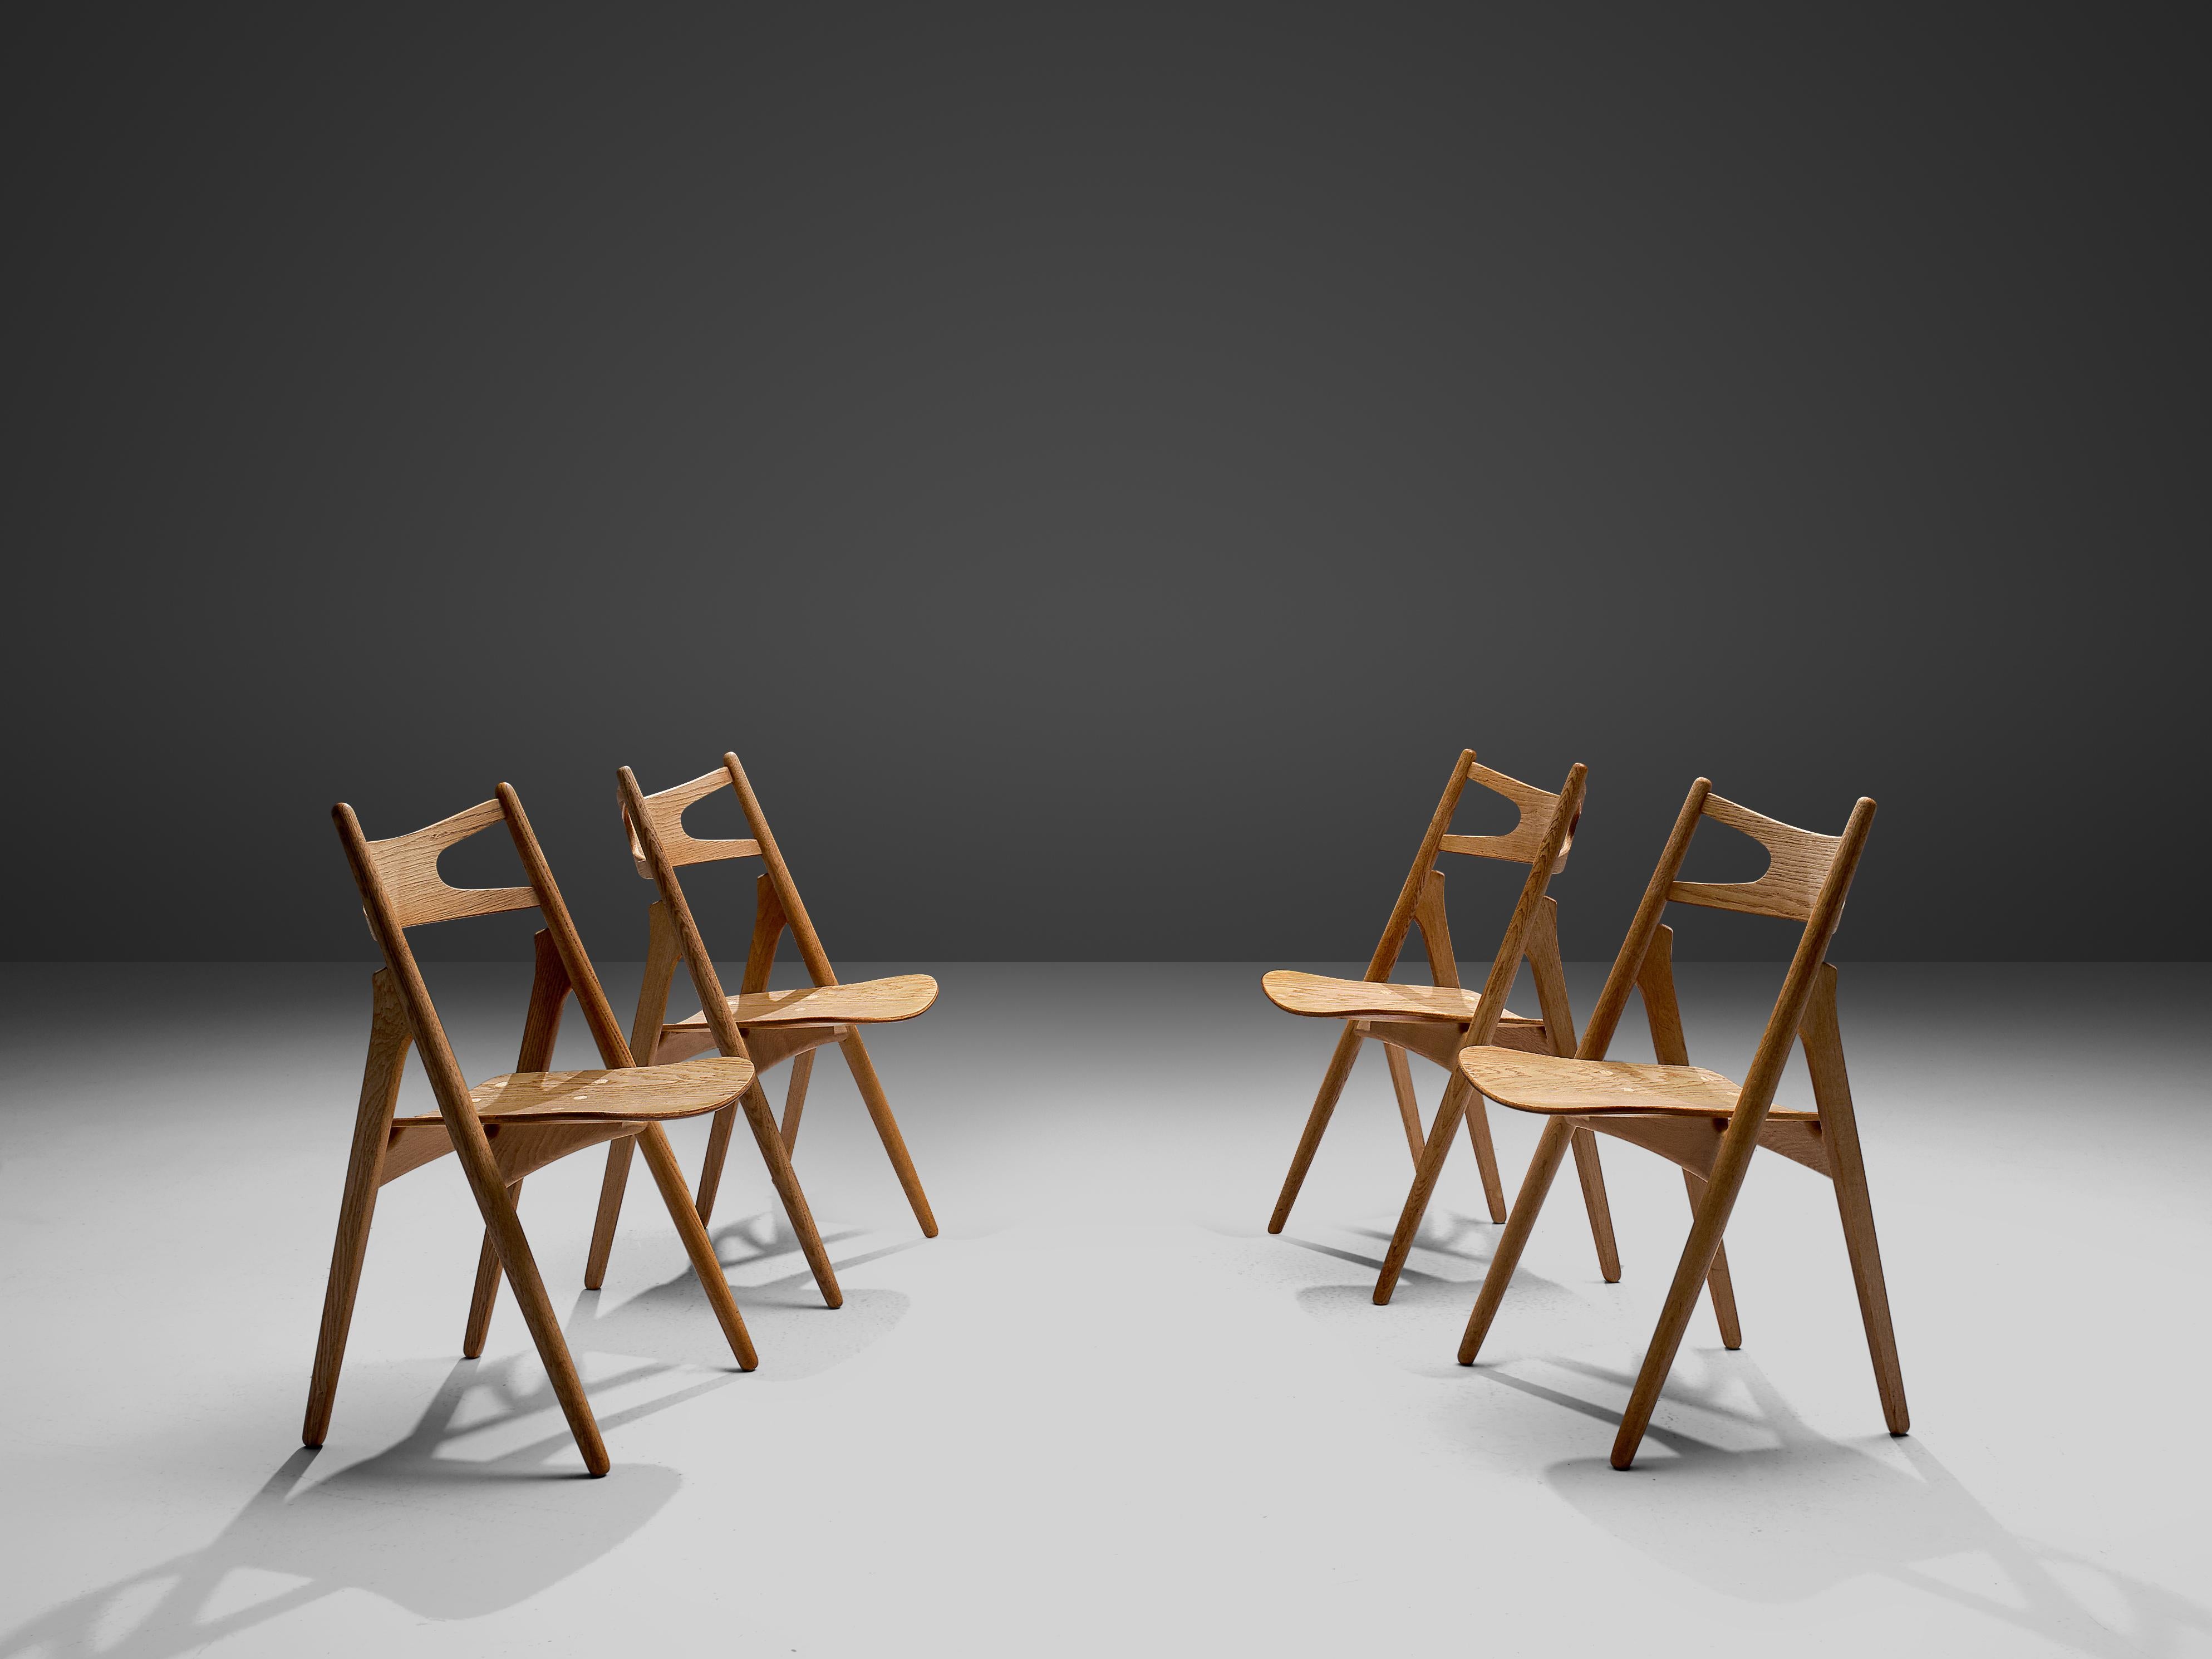 Hans J. Wegner for Carl Hansen & Søn, set of four 'Sawbuck' CH29 chairs, oak, Denmark, 1952.

This set of four chairs is designed by Hans J. Wegner for Carl Hansen. The chairs are defined by the V-shaped gaps in the back rest. The chair has a